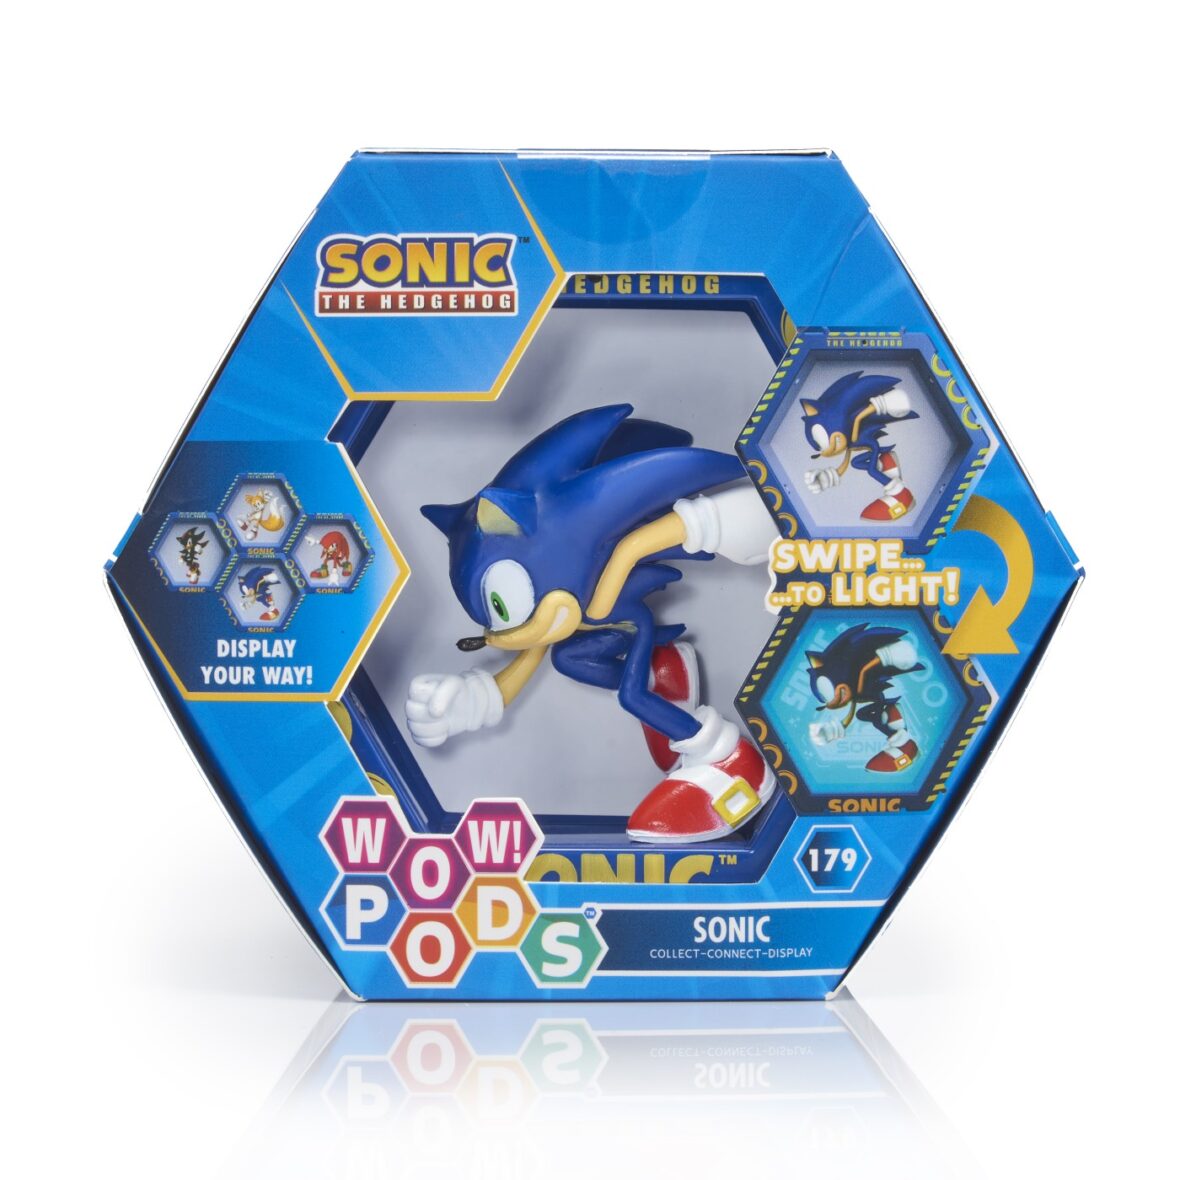 Wow! Pods – Sonic